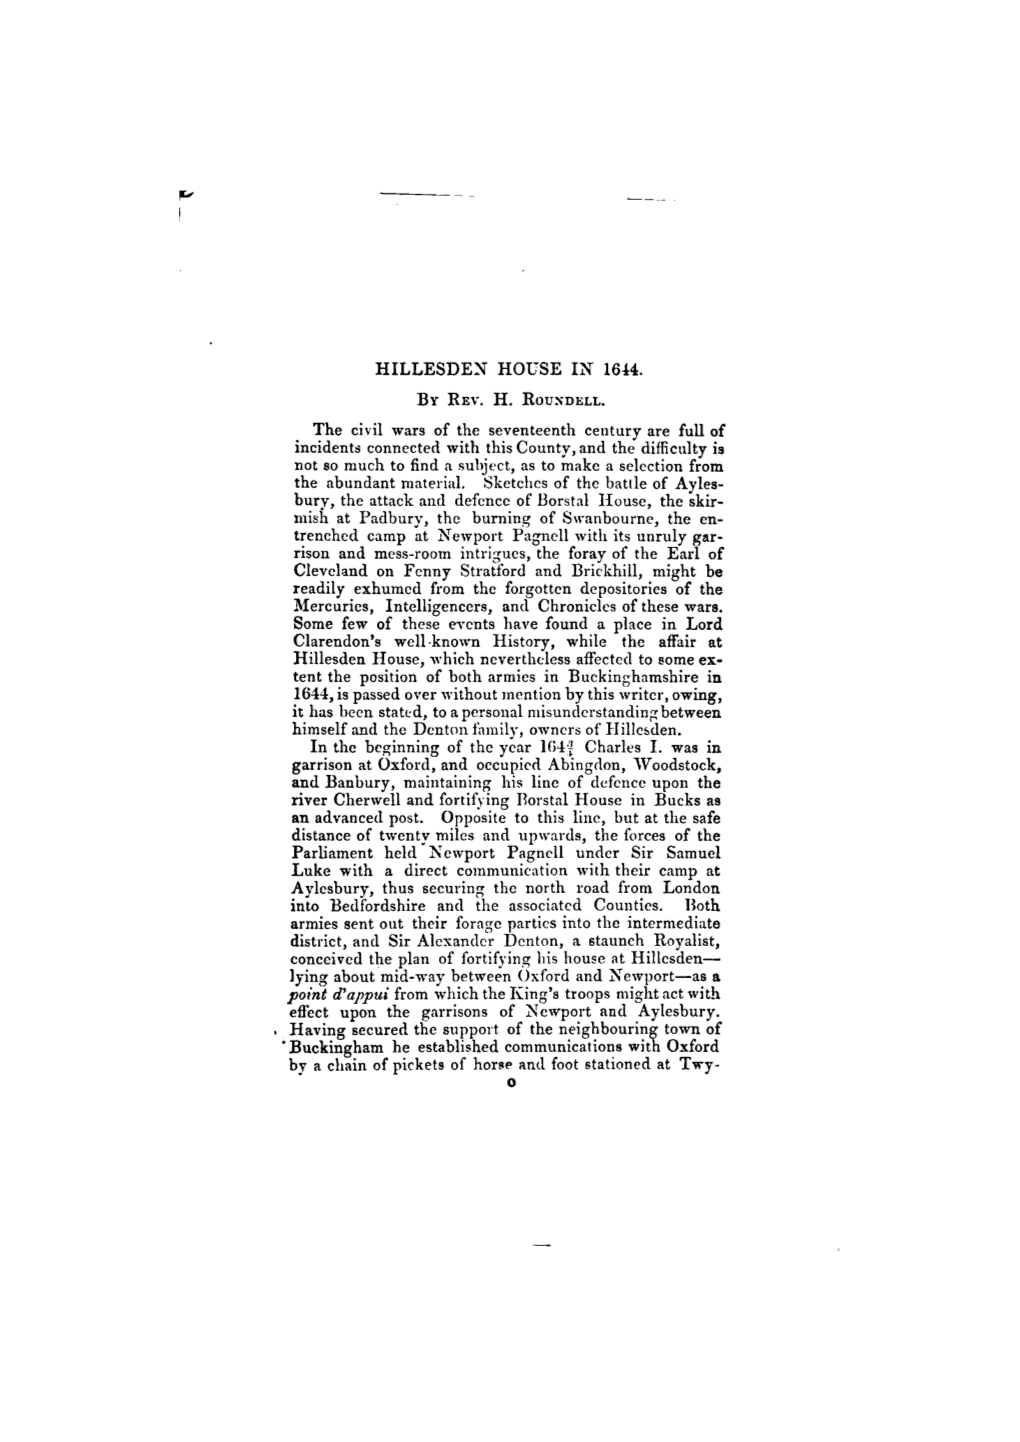 Records of Buckinghamshire, Or, Papers and Notes on the History